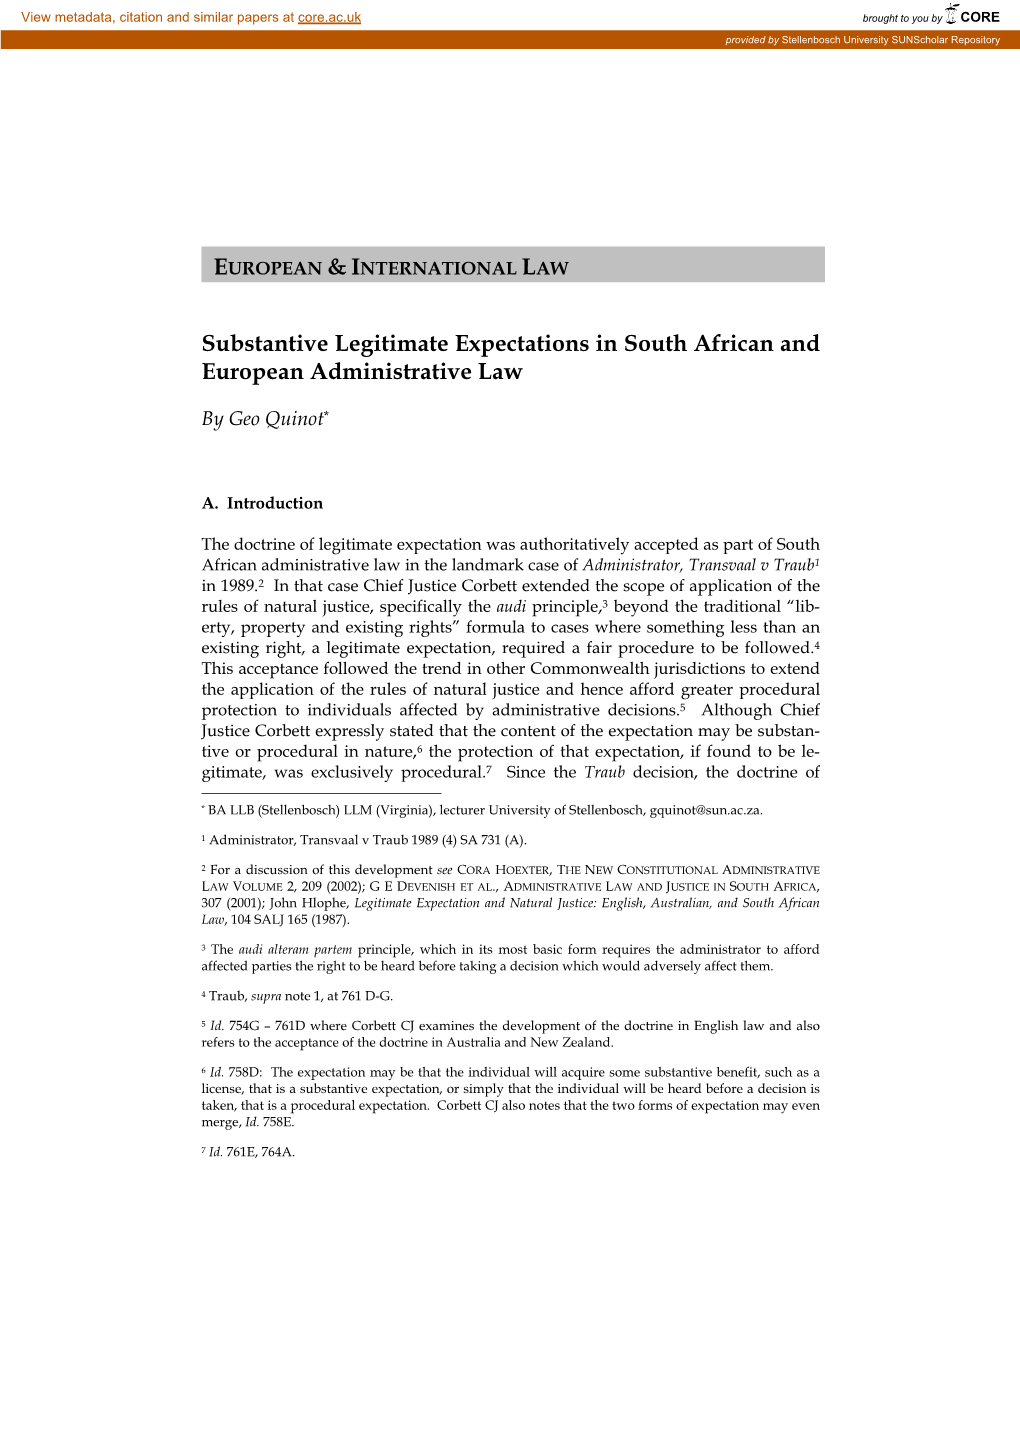 Substantive Legitimate Expectations in South African and European Administrative Law